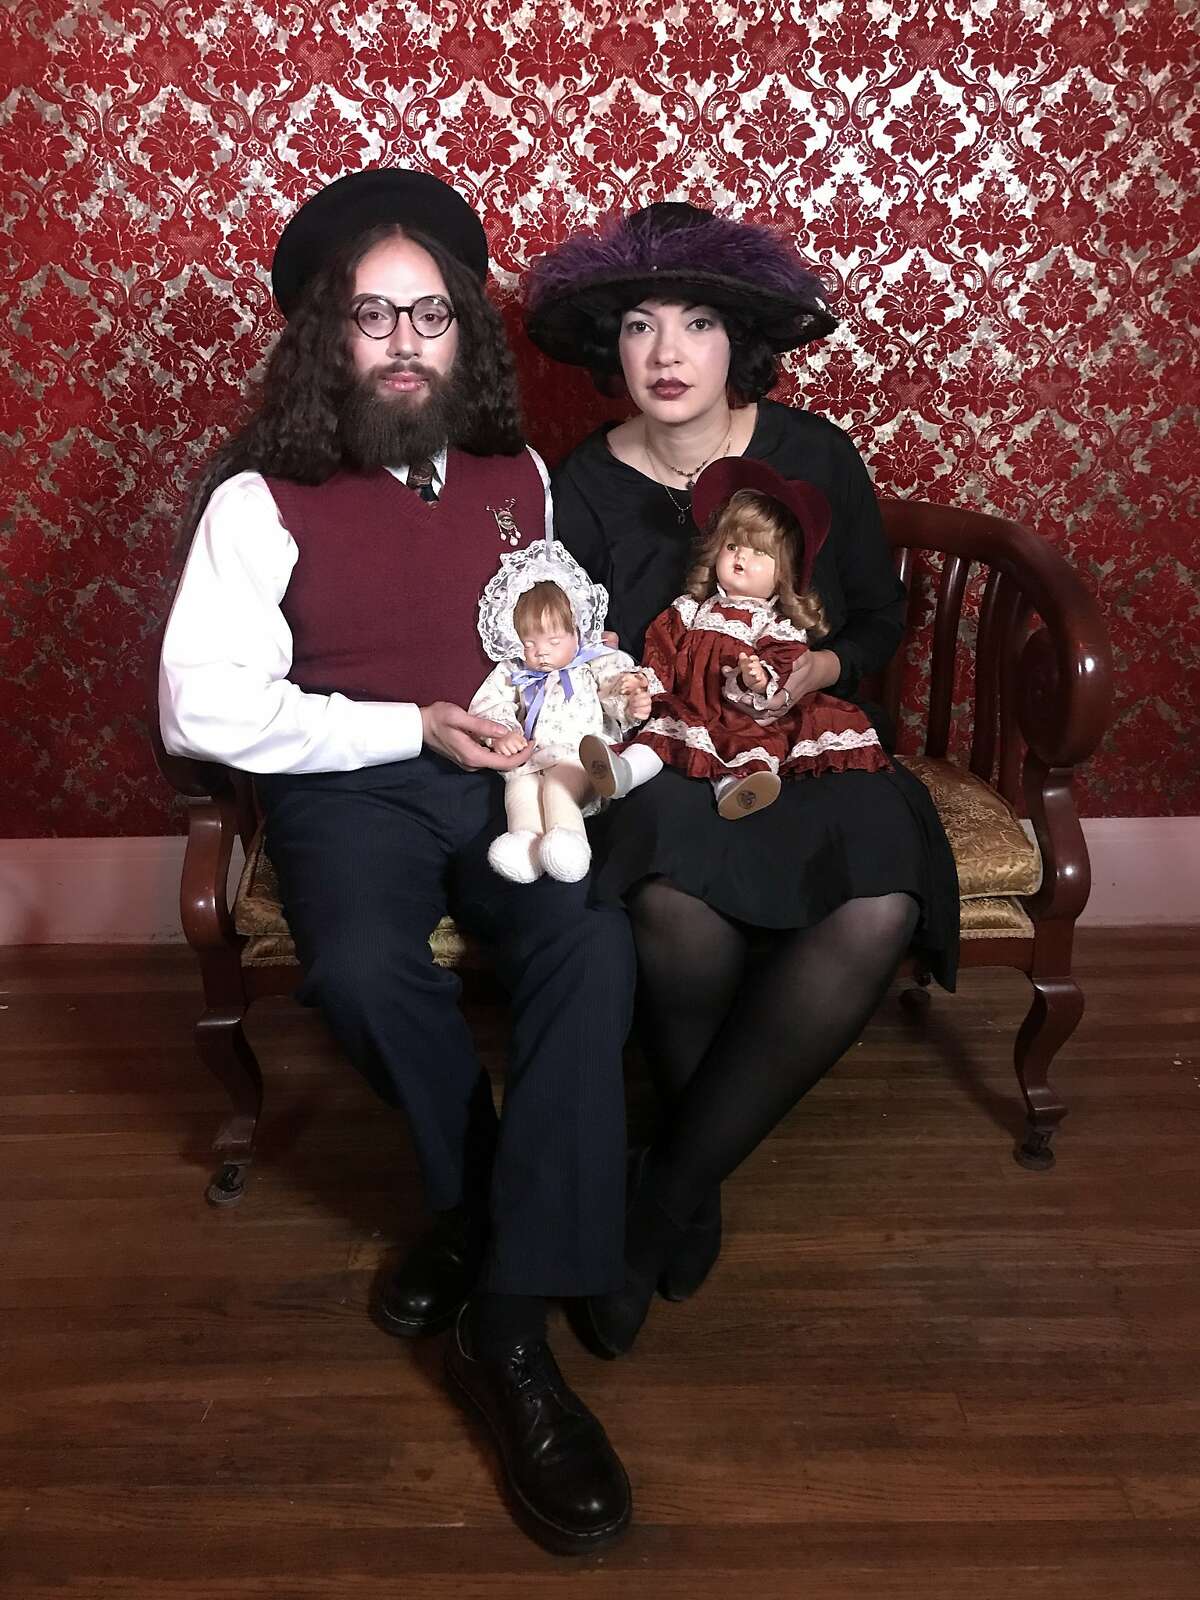 Aja de Coudreaux and her boyfriend Victor Vasquez de la Rocha, shown here in recent happier times, both have COVID-19 and were self-isolating at home in March 26, 2020. The two like to dress in period costumes for events.